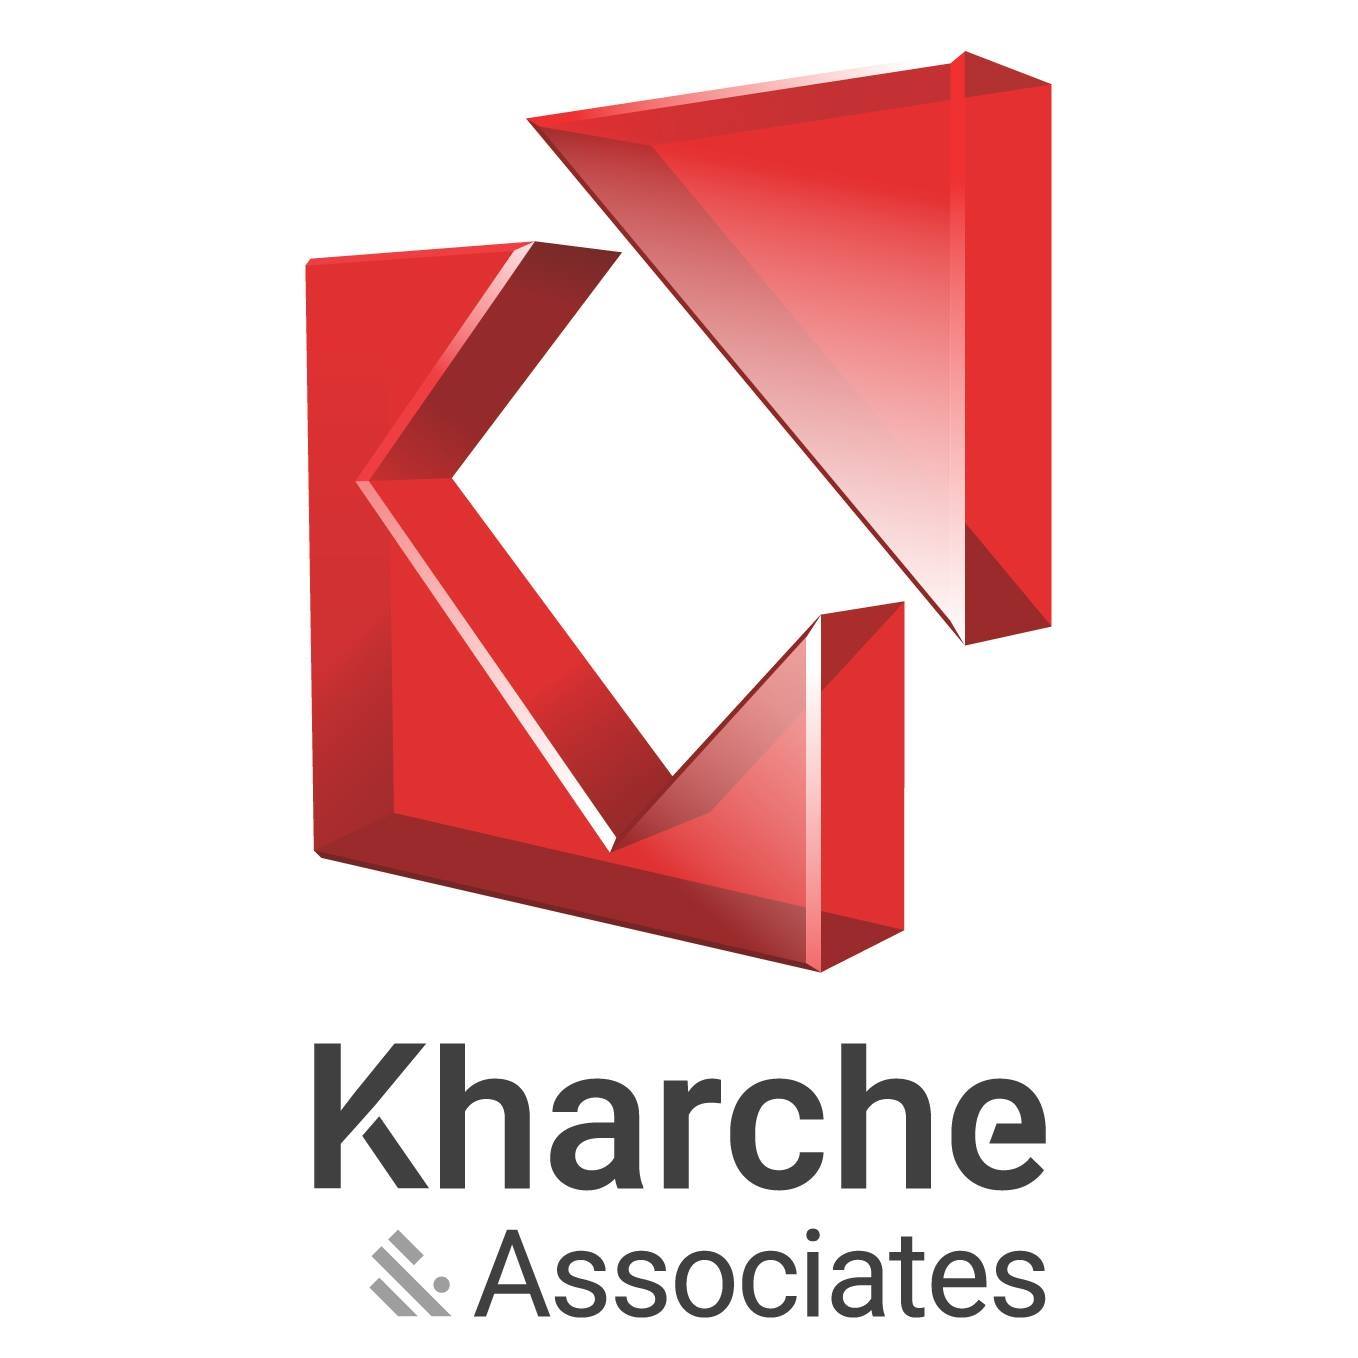 Kharche & Associates|Accounting Services|Professional Services